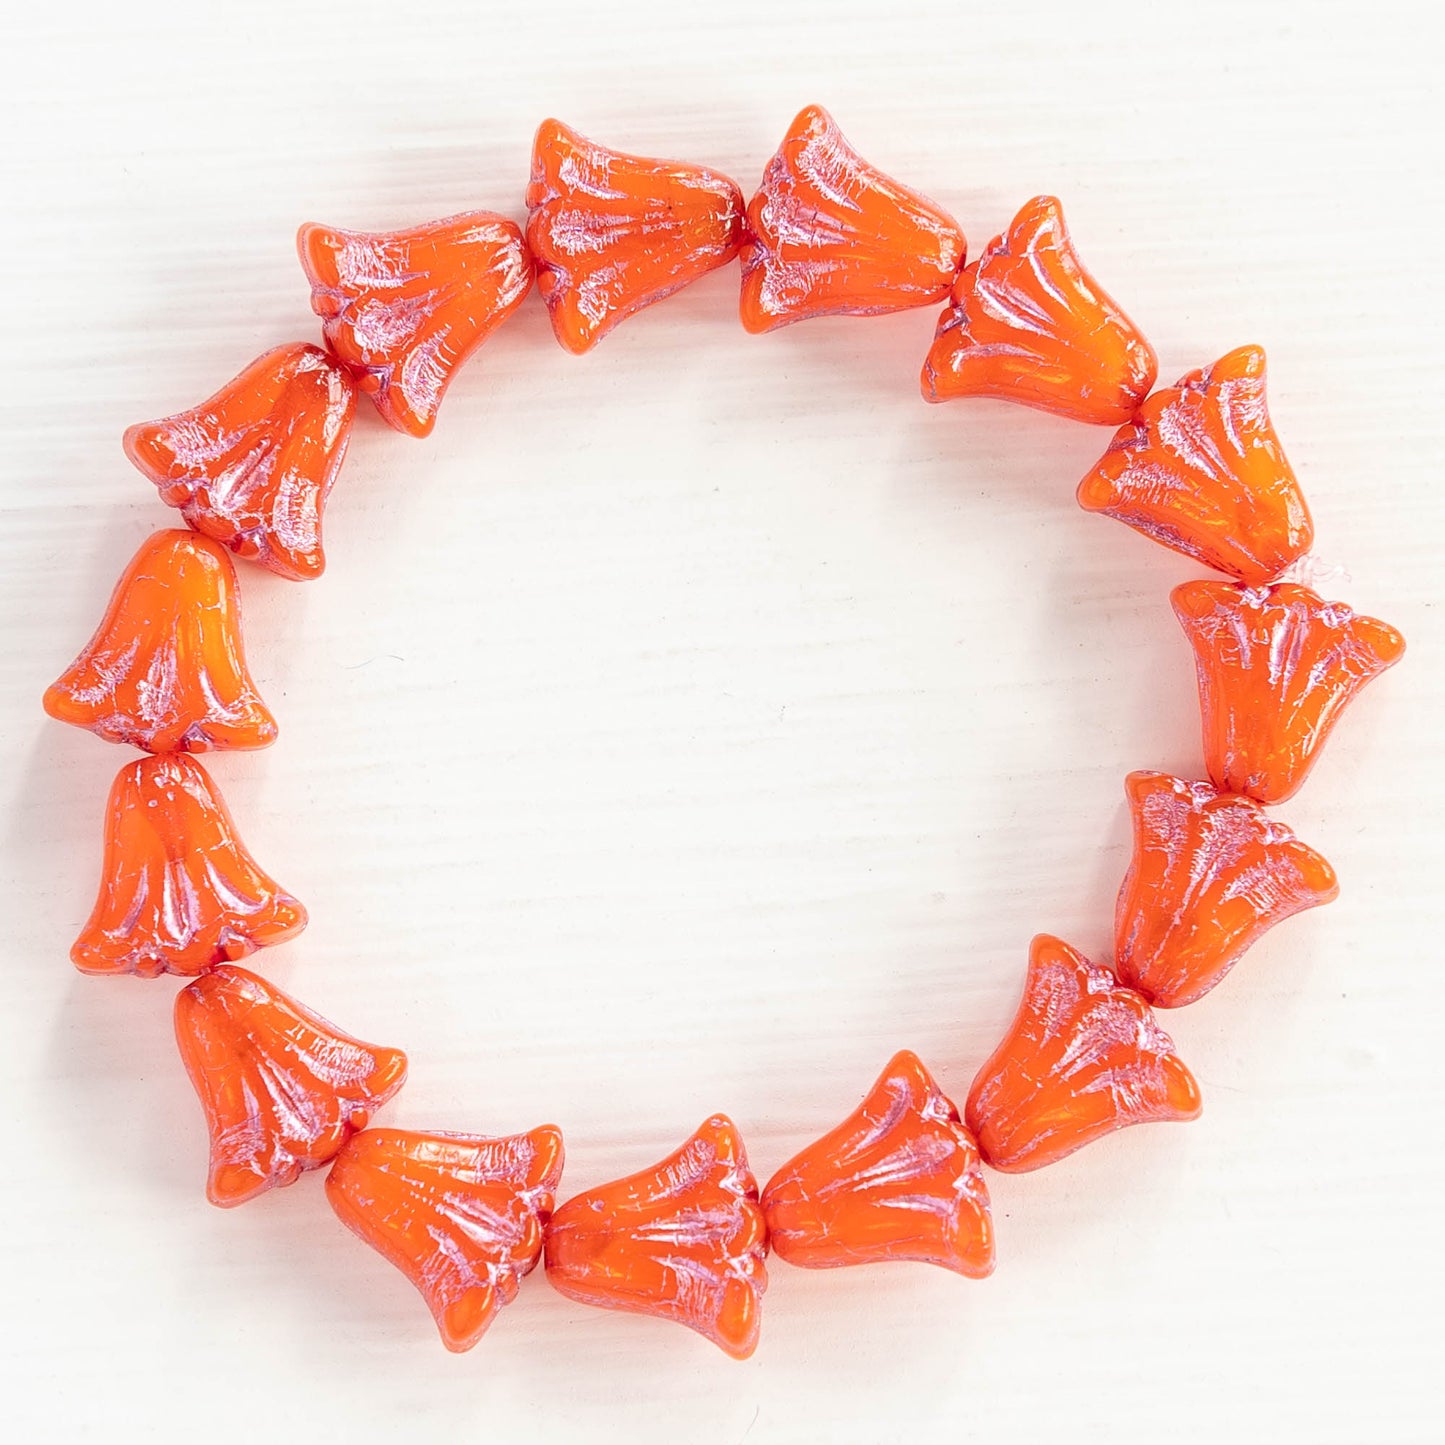 9x10mm Lily / Tulip Flower Beads - Orange Opaline with Shiny Pink Wash - 15 Beads